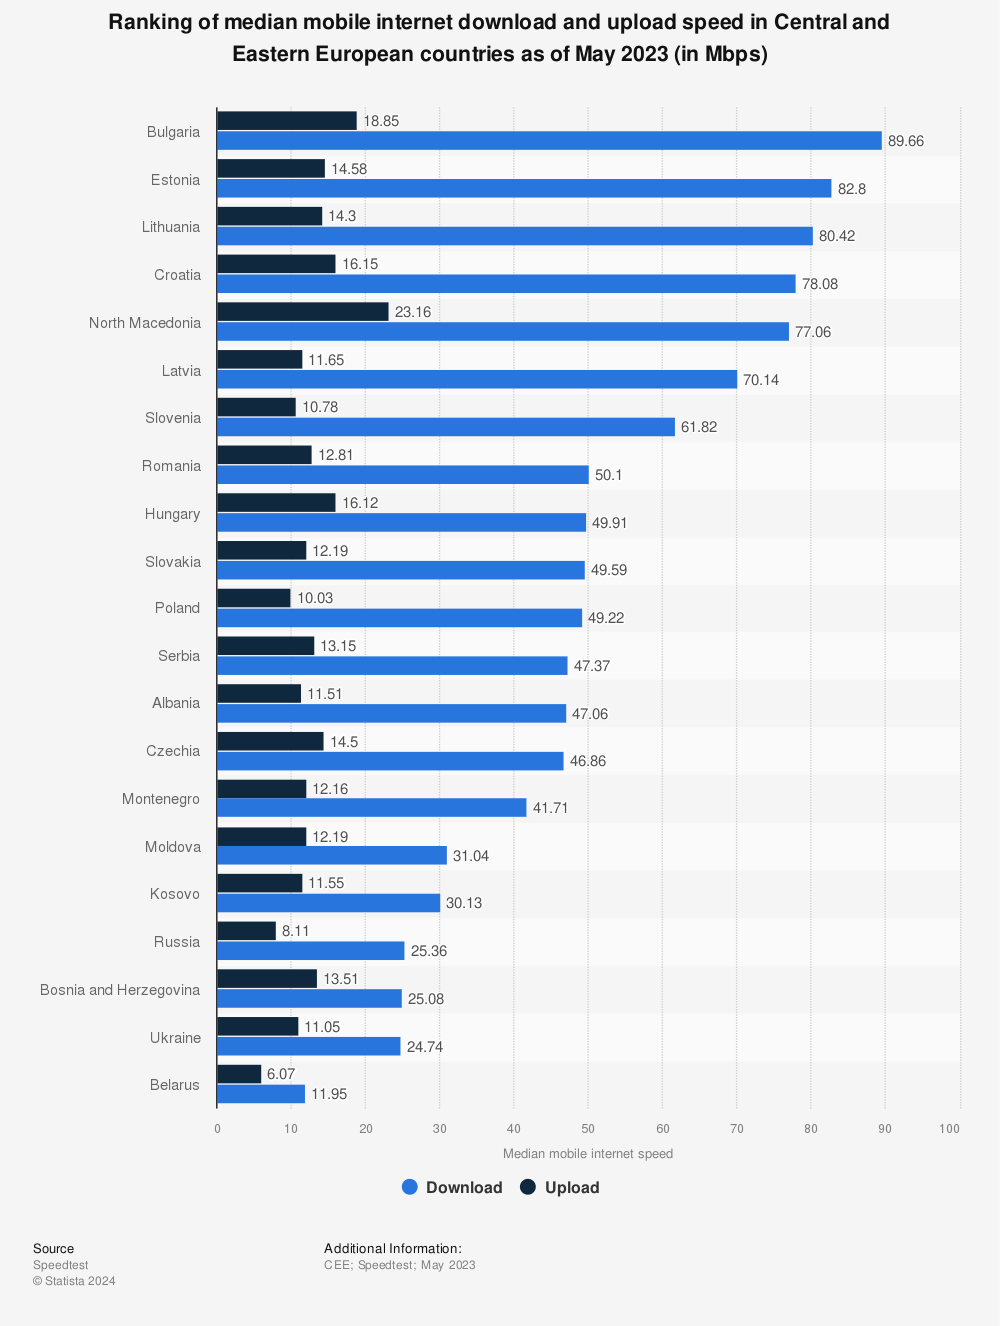 Statistic: Ranking of median mobile internet download and upload speed in Central and Eastern European countries as of May 2023 (in Mbps) | Statista